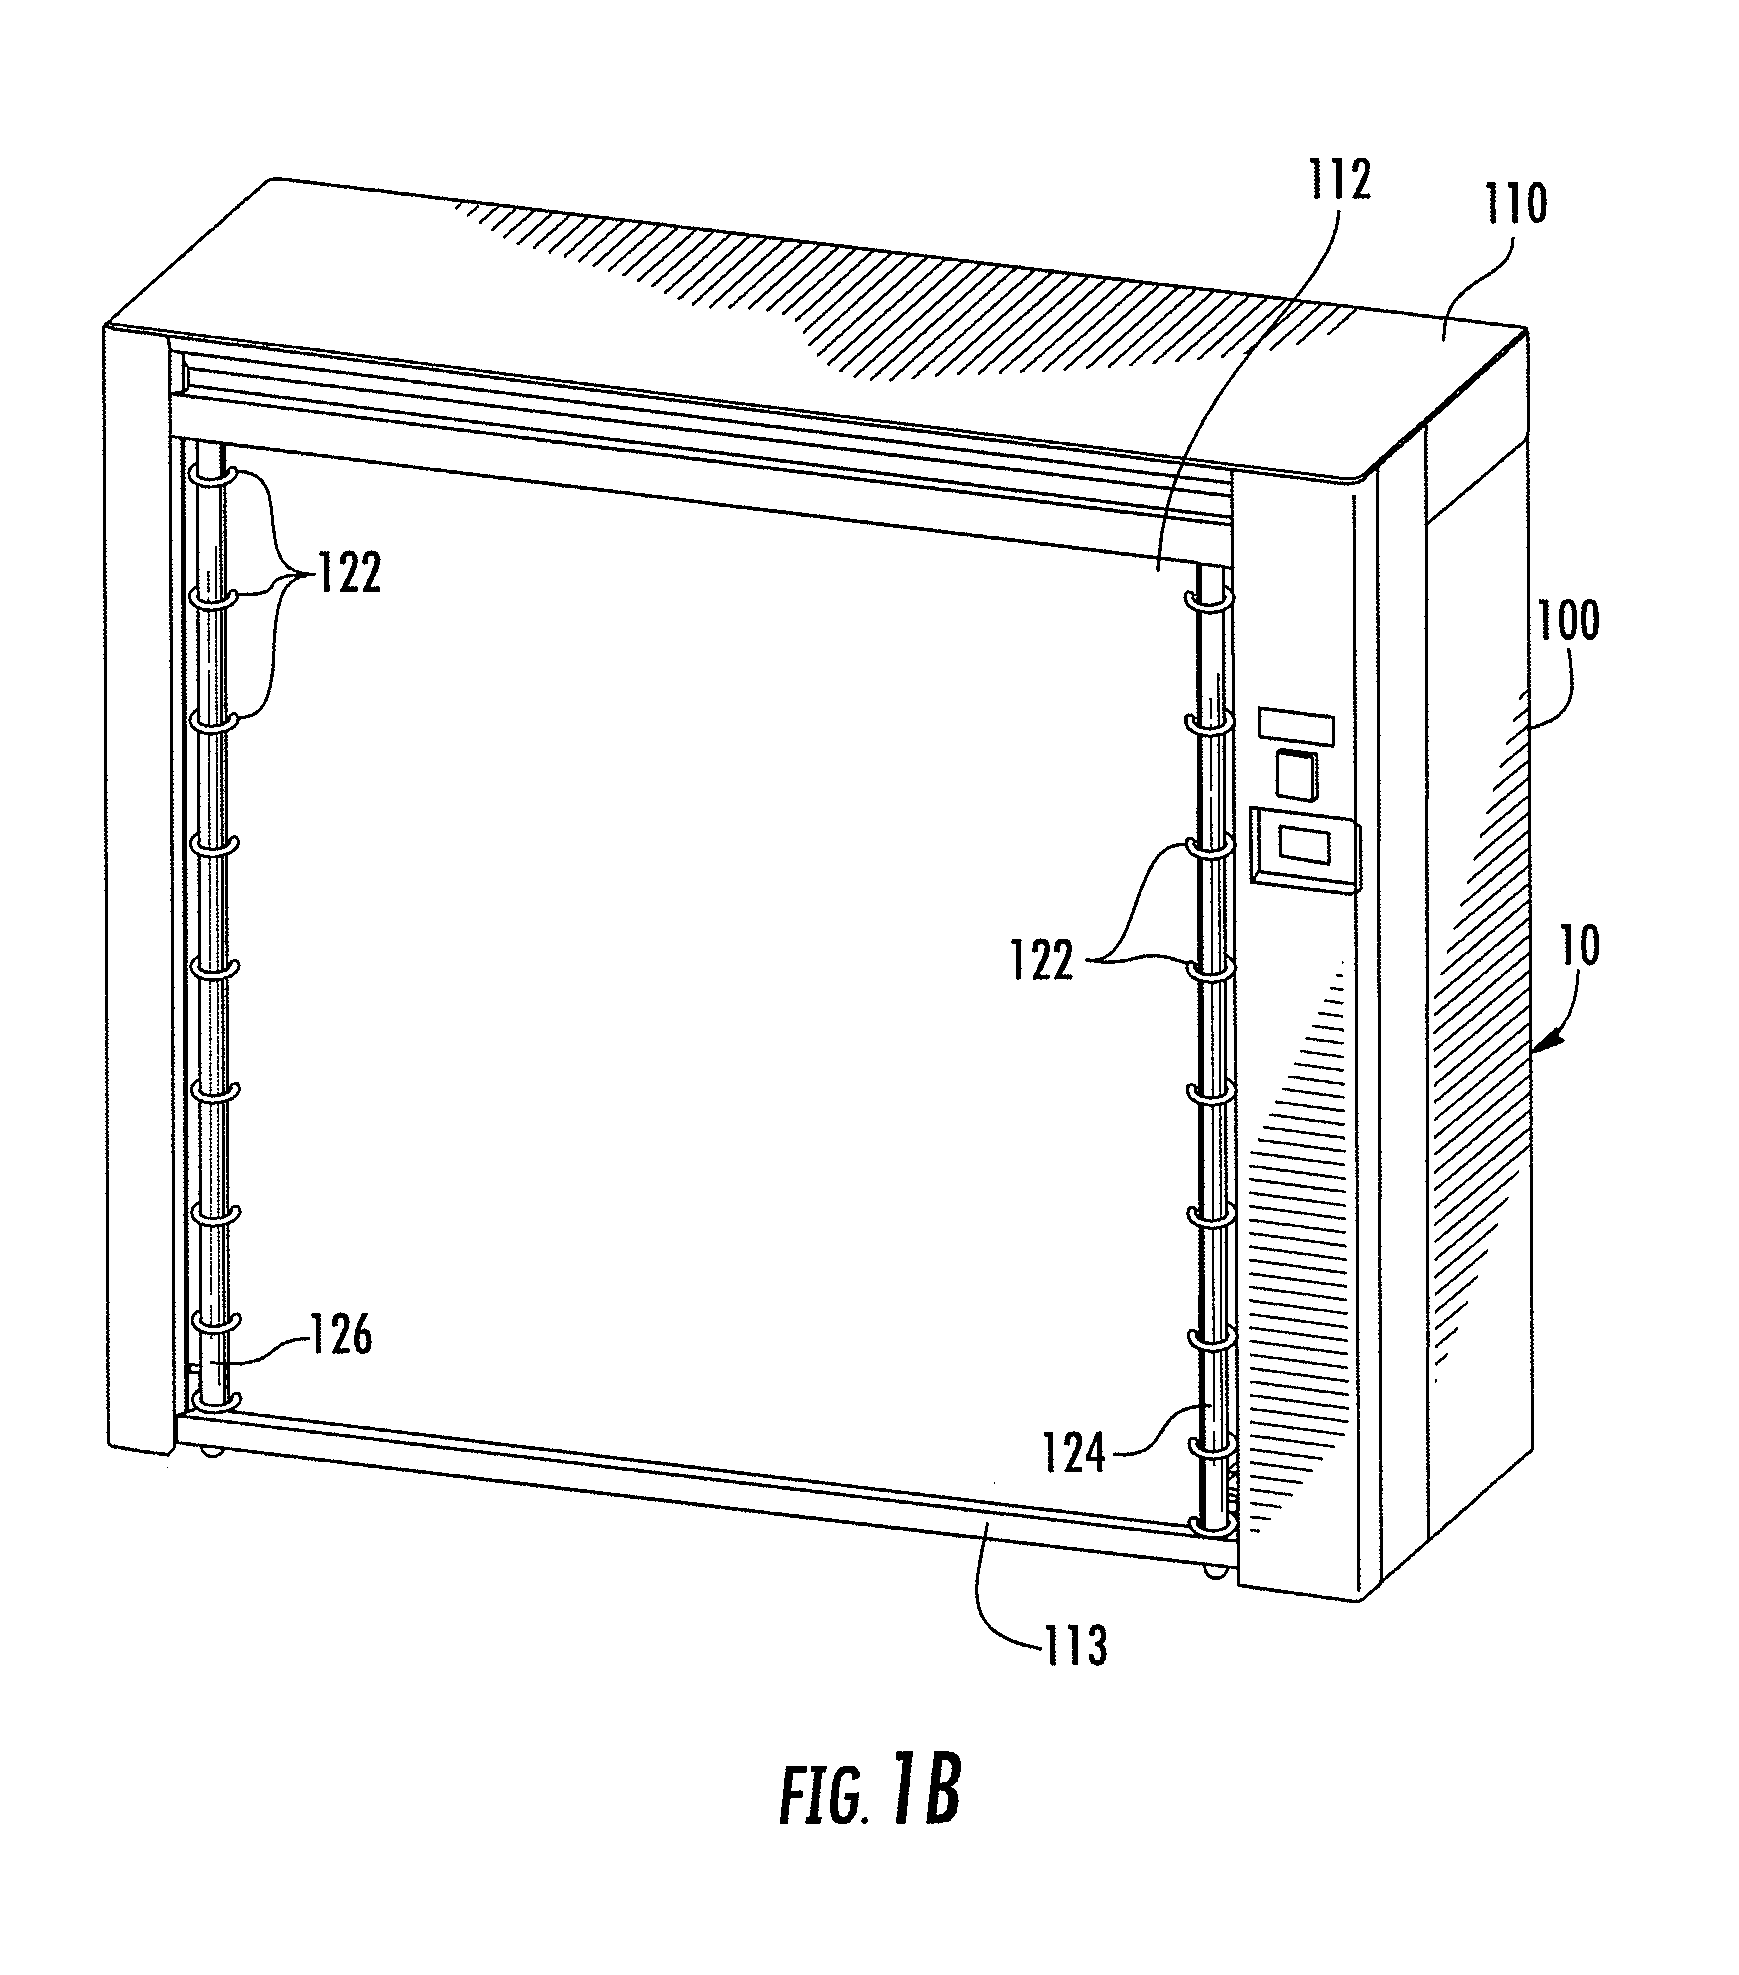 Guides and other apparatus for inserting a cart, such as a cart with one or more fixed wheels, into an enclosure